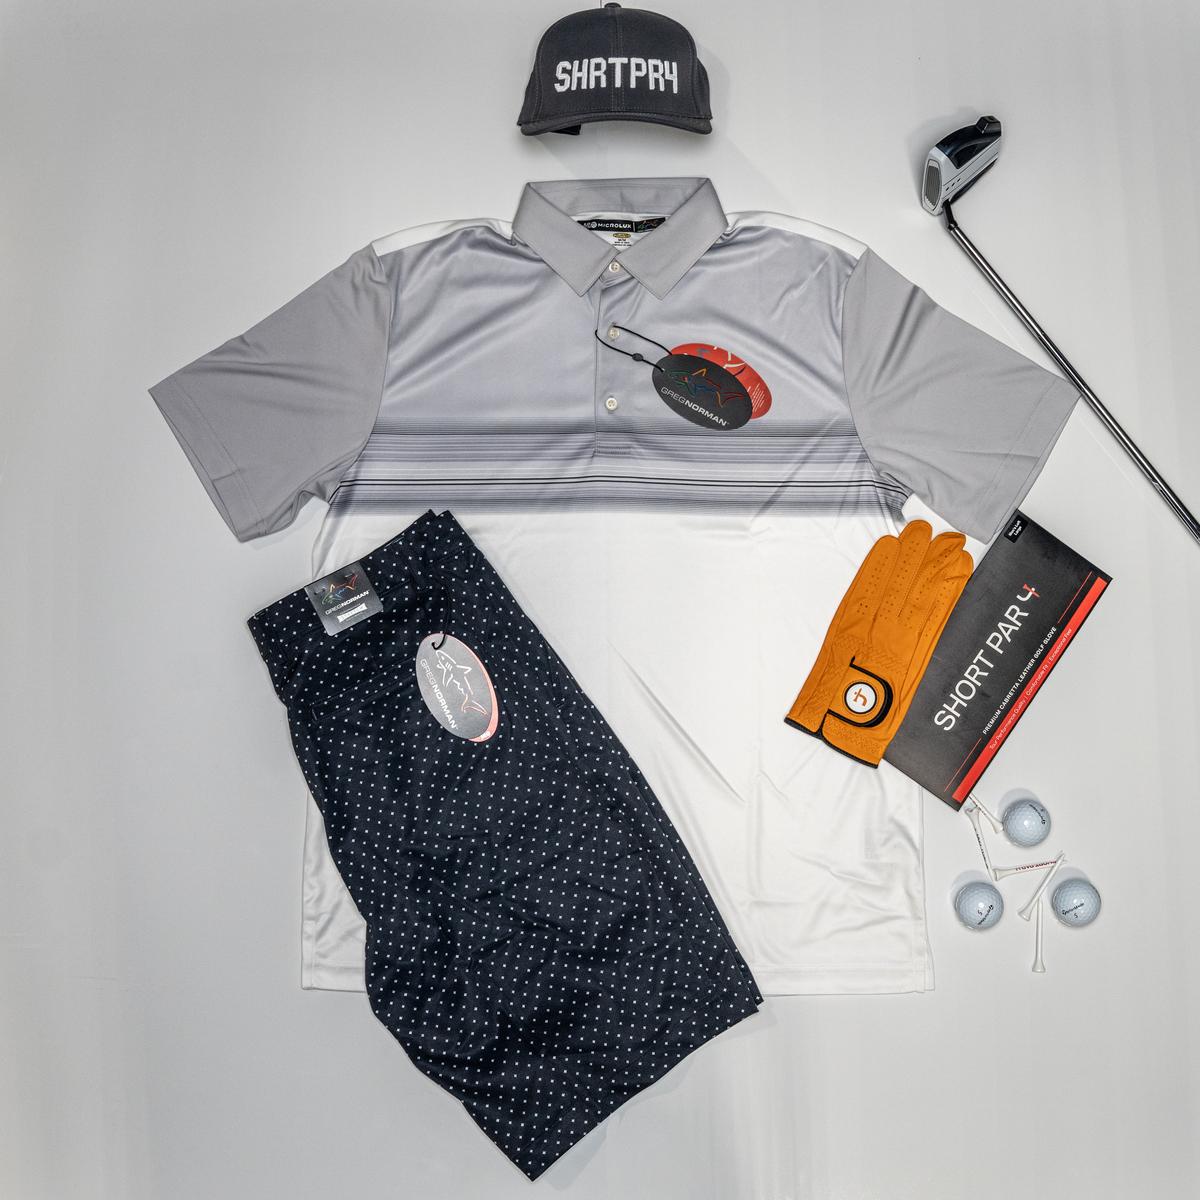 Golf More, Shop Less with Your Personal Short Par 4 Style Caddie